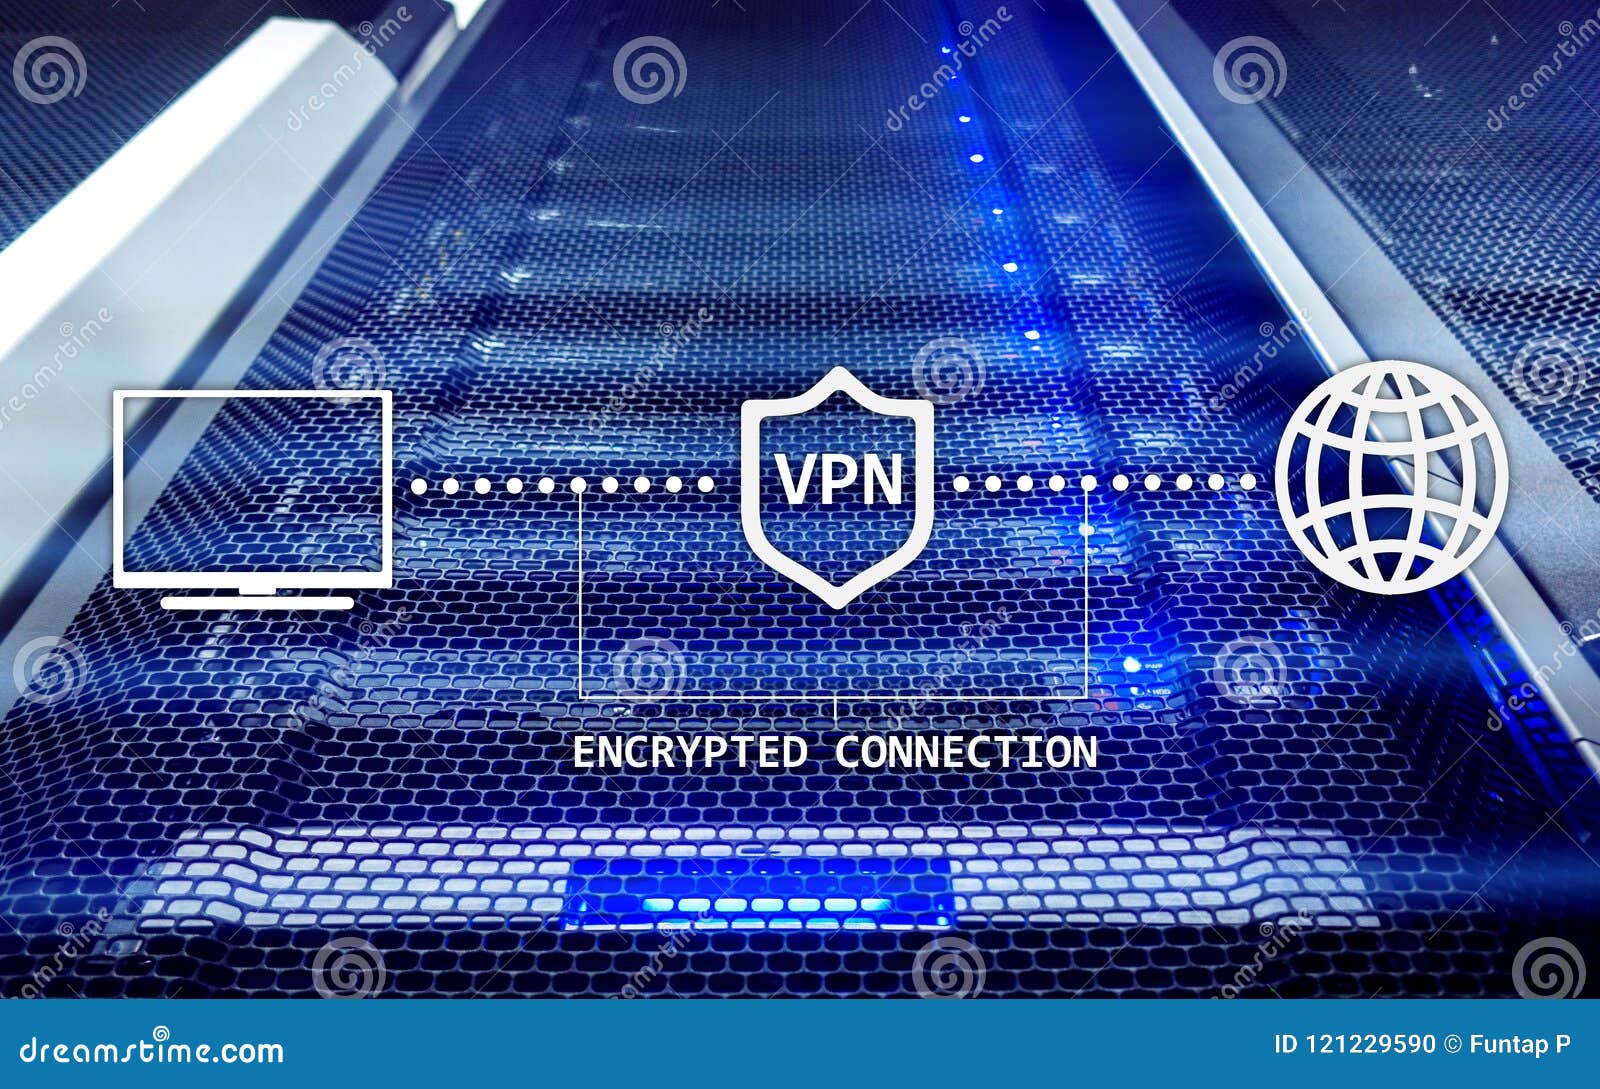 virtual private network, vpn, data encryption, ip substitute